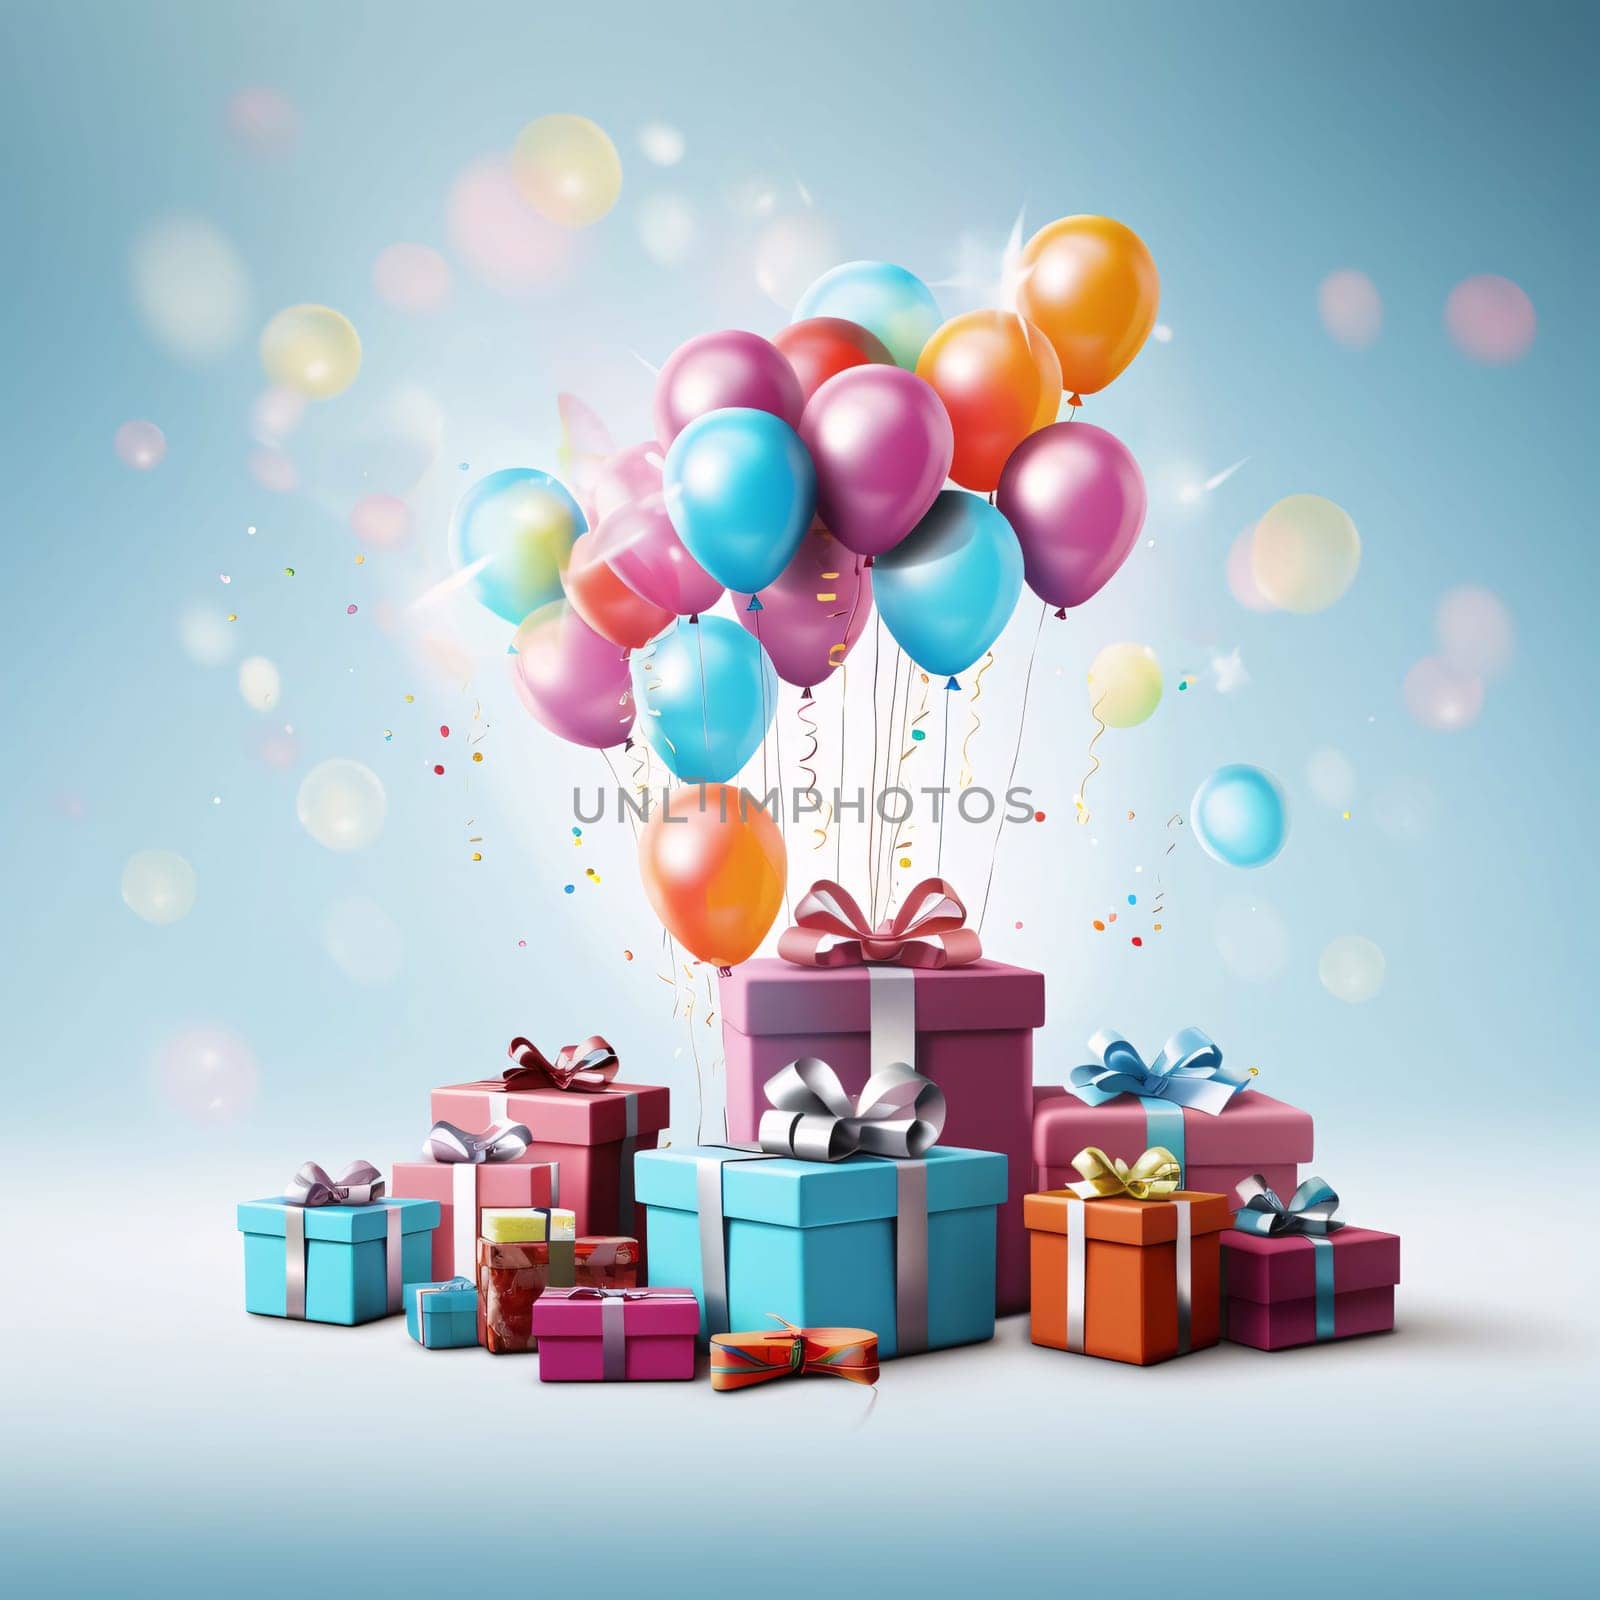 Many colorful gifts with bows, colorful rainbow balloons, blurred background.Valentine's Day banner with space for your own content. Heart as a symbol of affection and love.